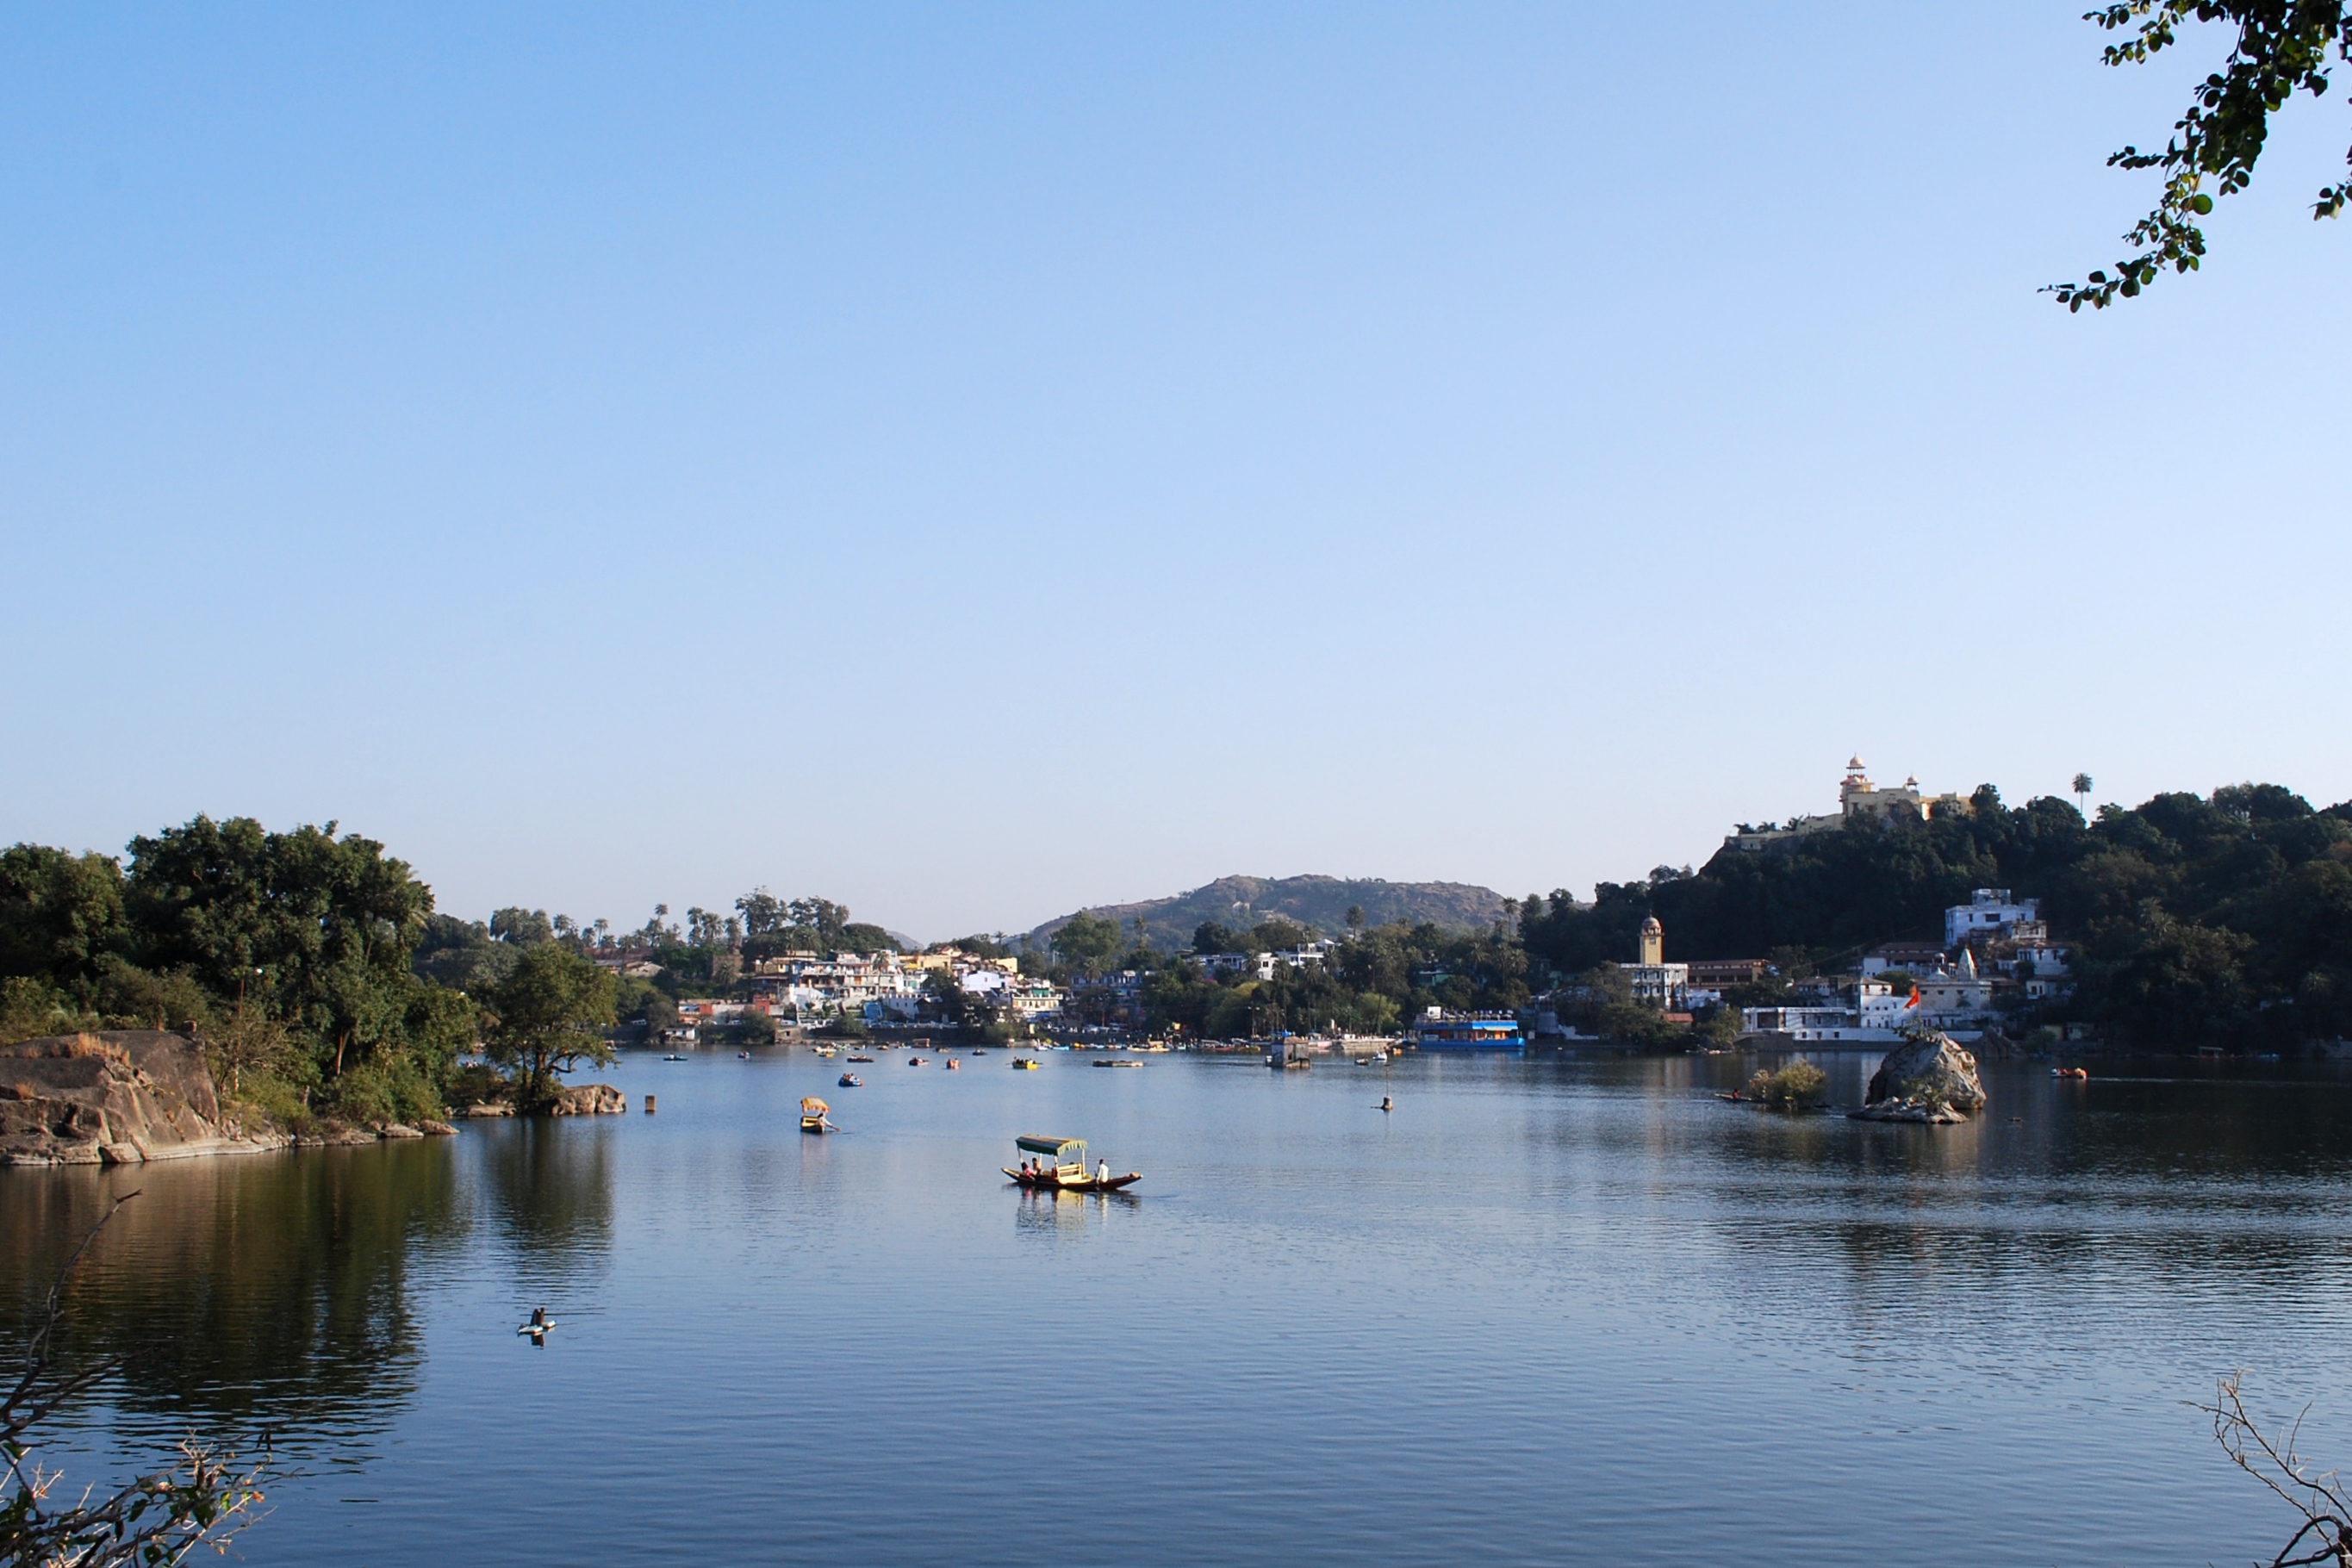 Magnificent Mount Abu at Hillock Hotel